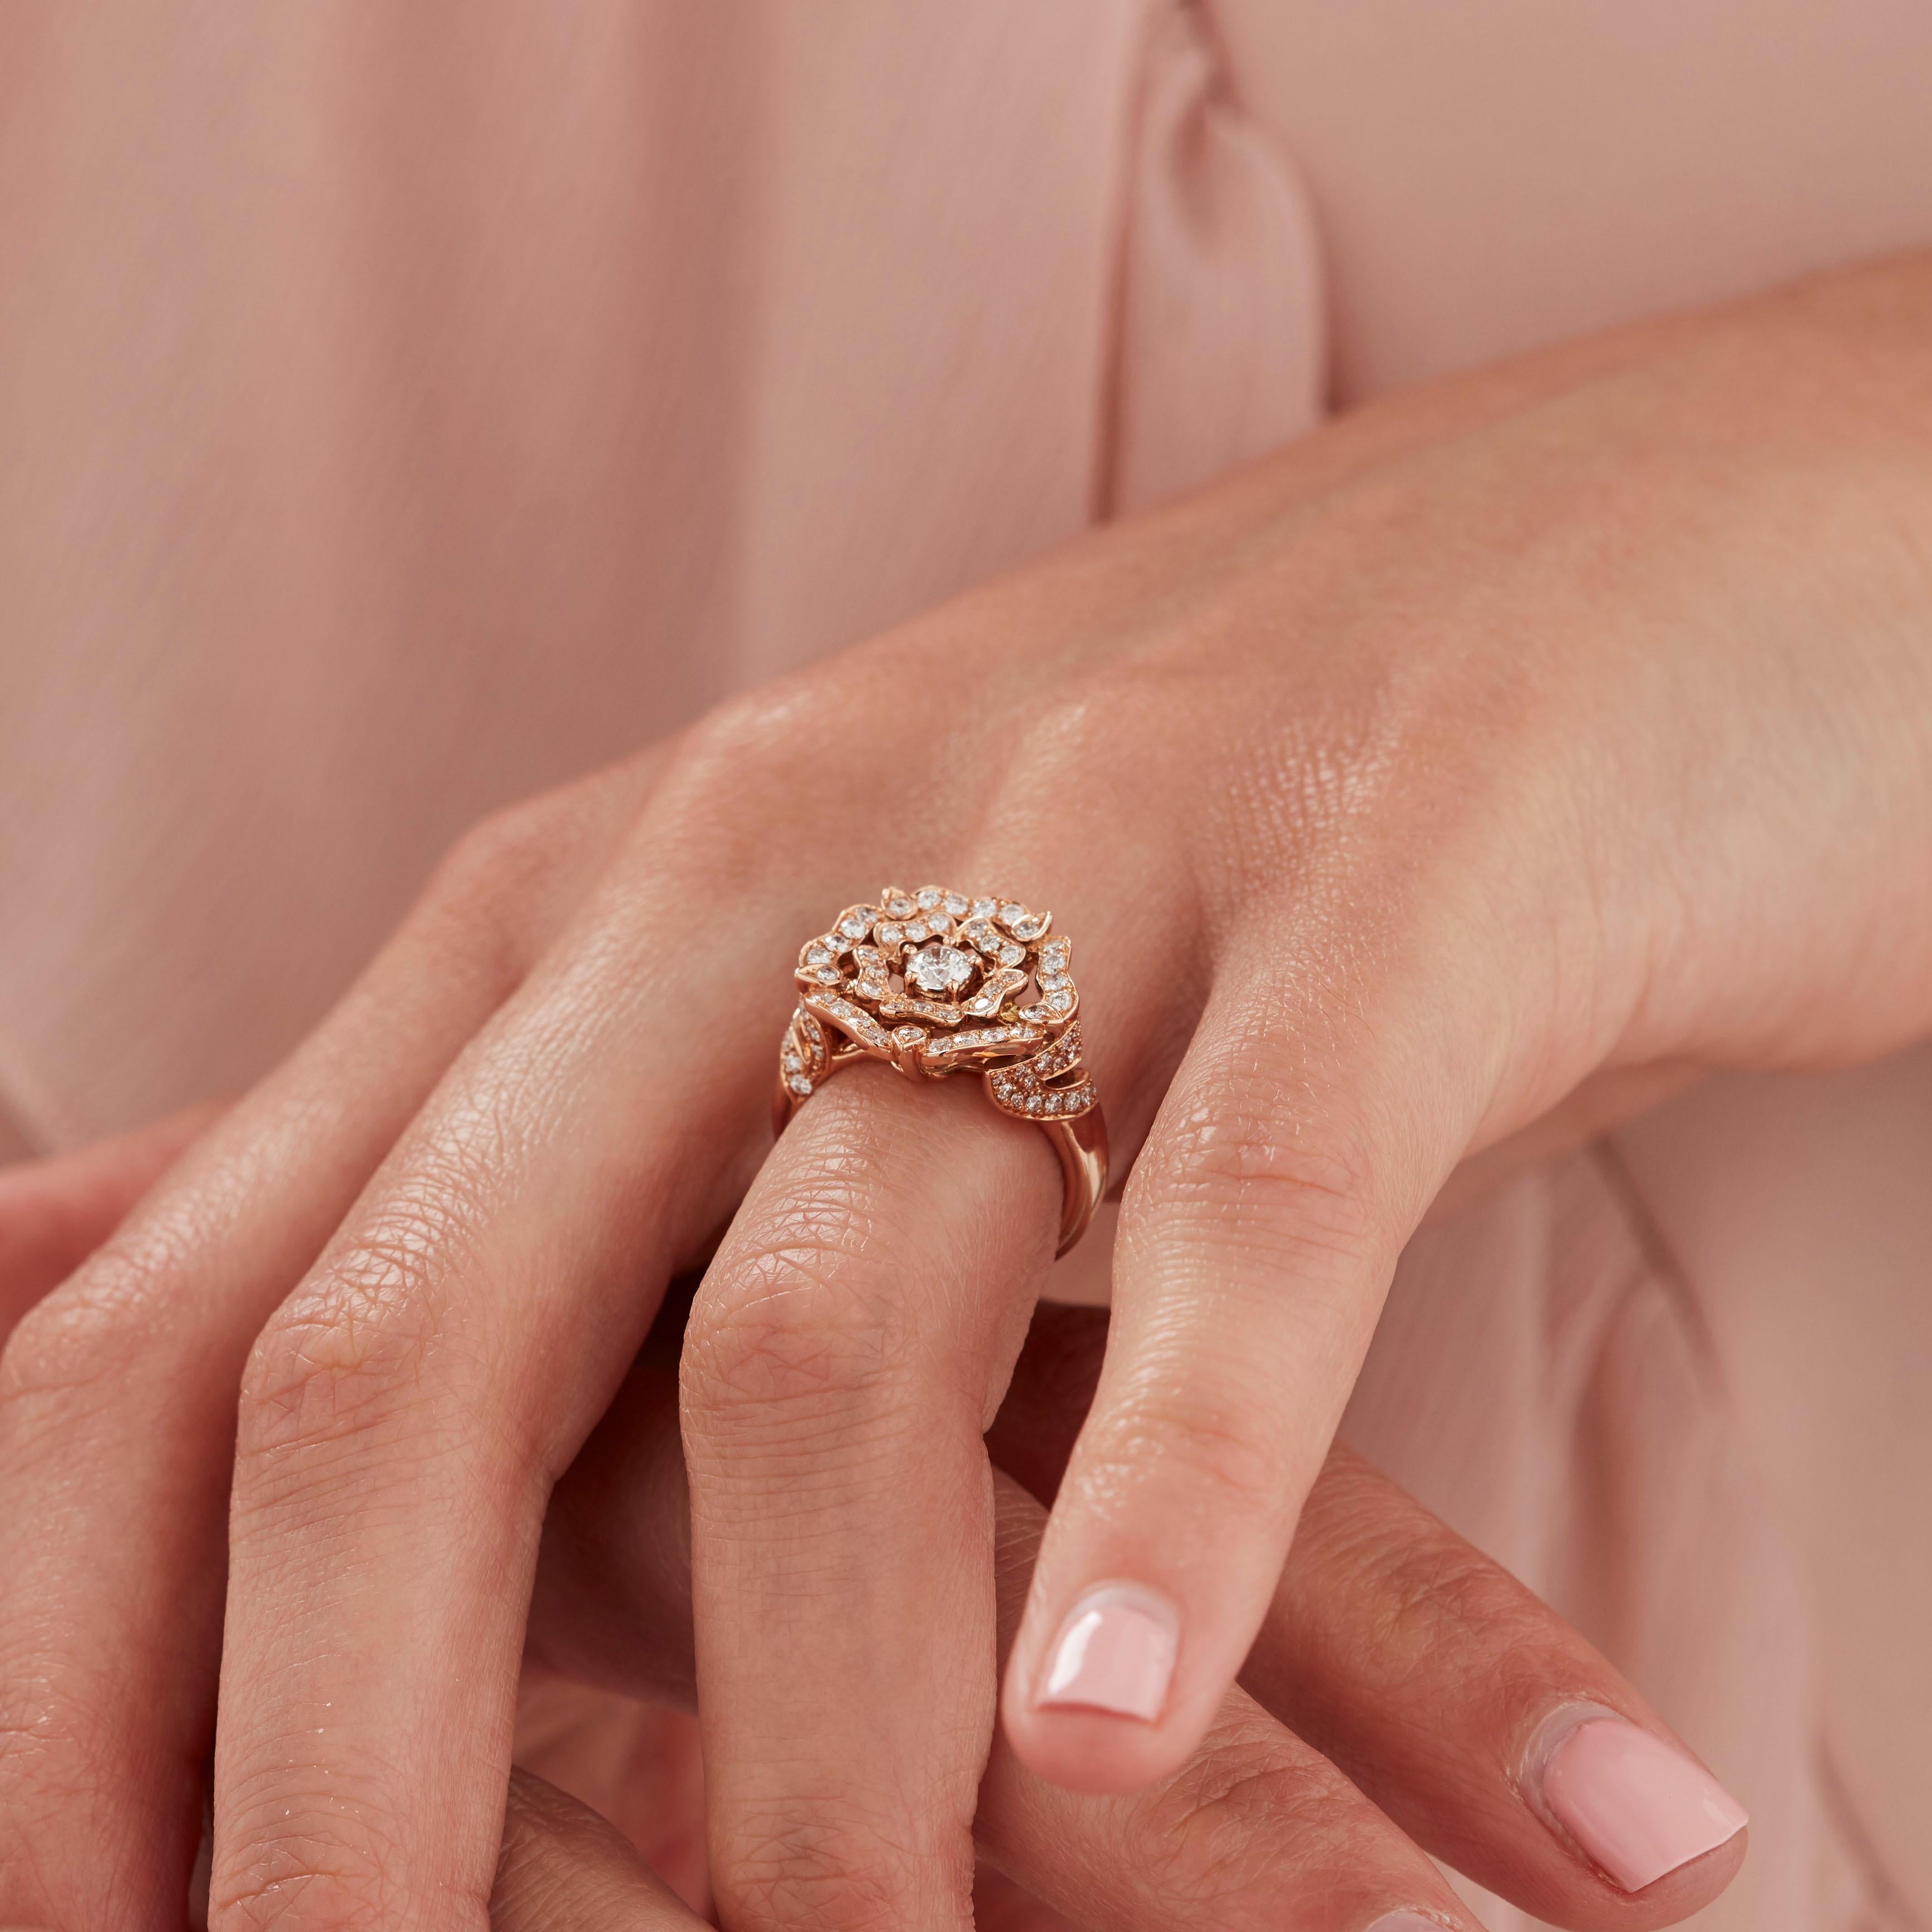 A House of Garrard 18 karat rose gold ring from the Tudor Rose collection set with round white diamonds.

83 round white diamonds weighing: 0.84cts
Total diamond weight: 0.84cts
Please note the once the ring is resized we cannot accept the